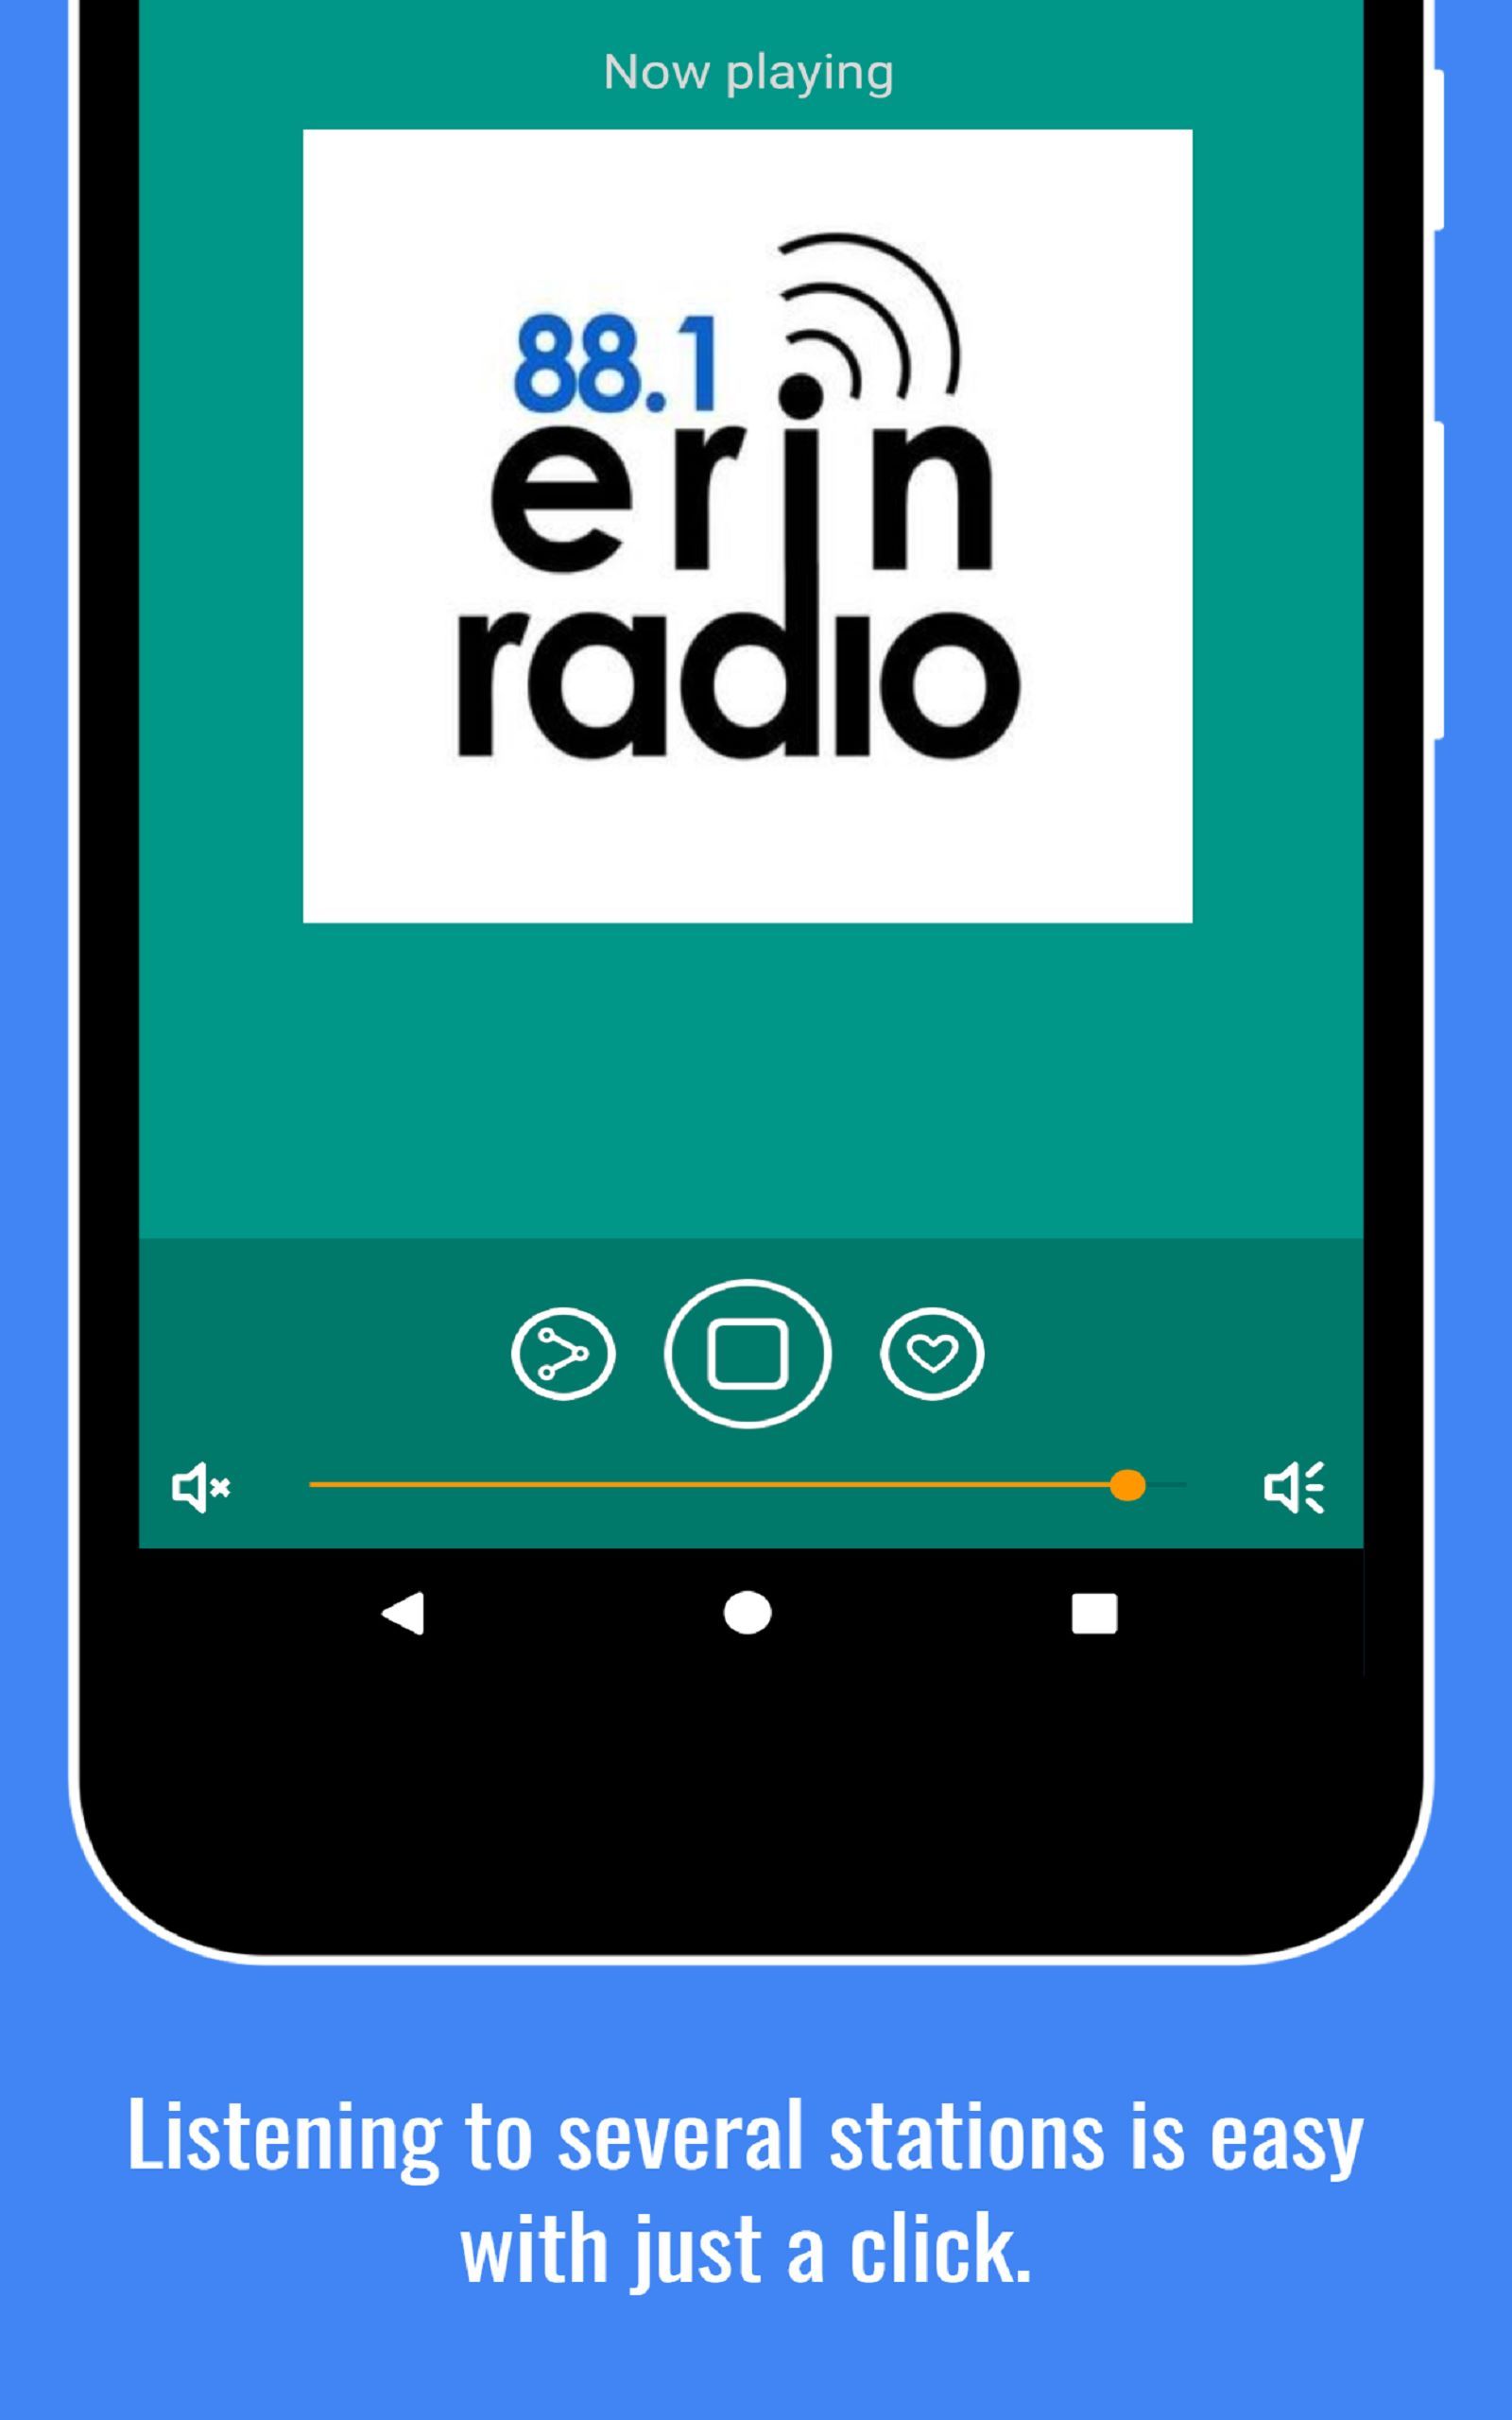 Radio FM AM Free - Radio World online + Radio Worldwide App to Listen to for Free on Amazon and Android